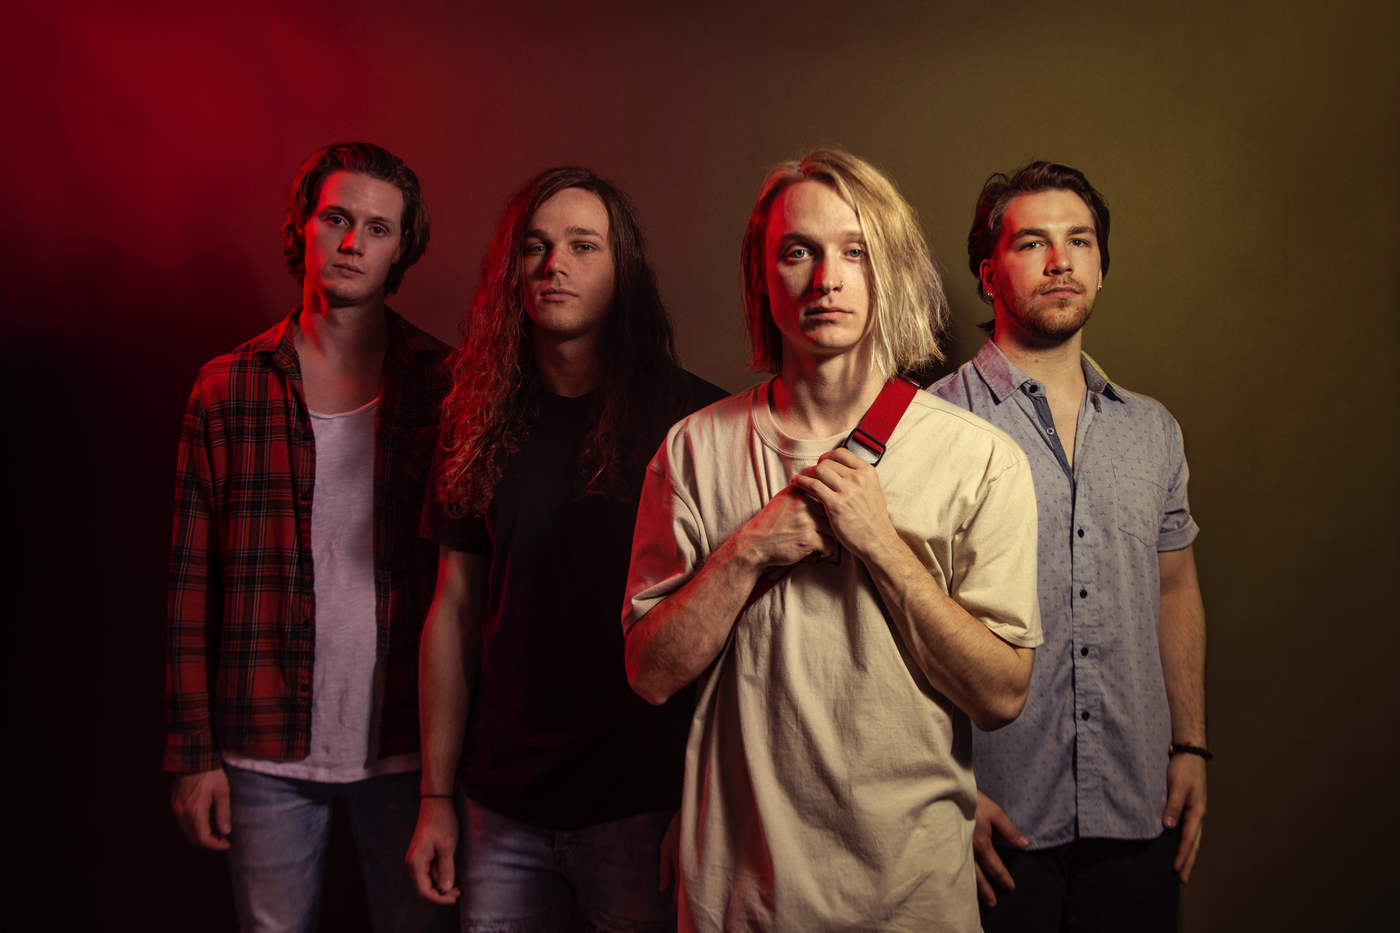 PICTURESQUE RELEASE NEW SINGLE, “HOPELESS”